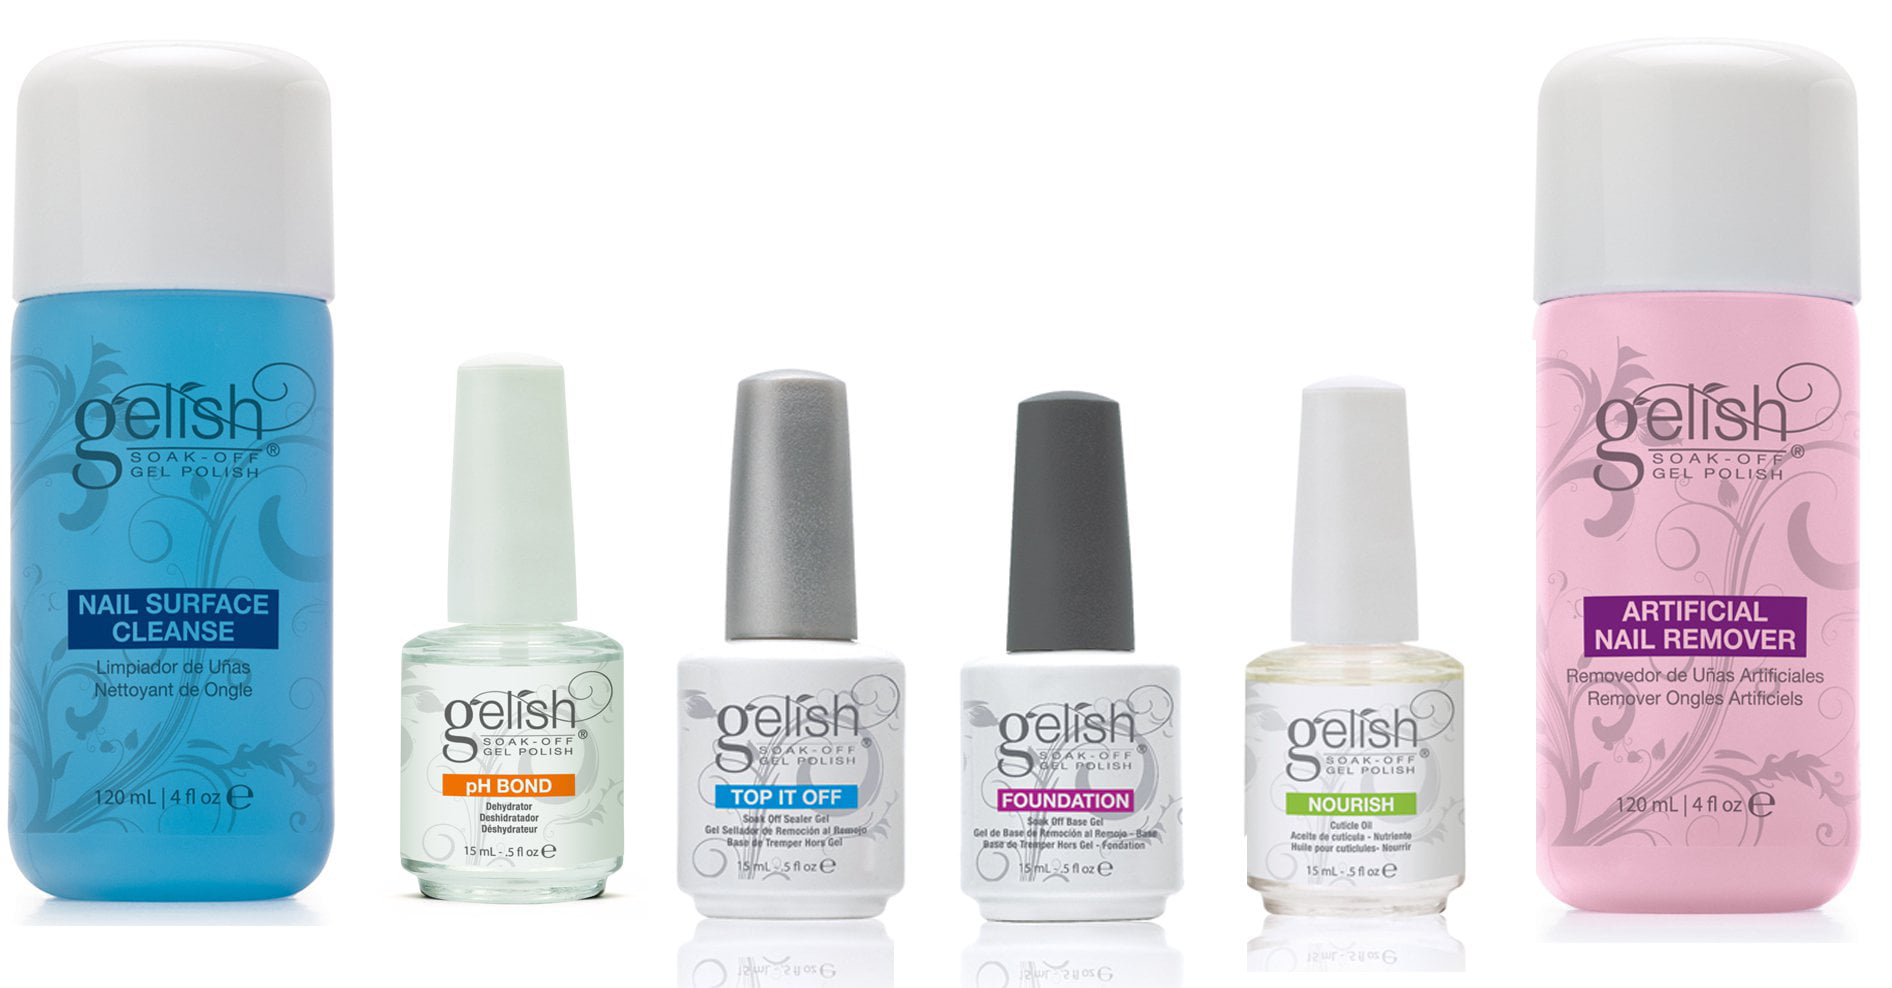 4. Gelish Nail Color Chart - wide 4